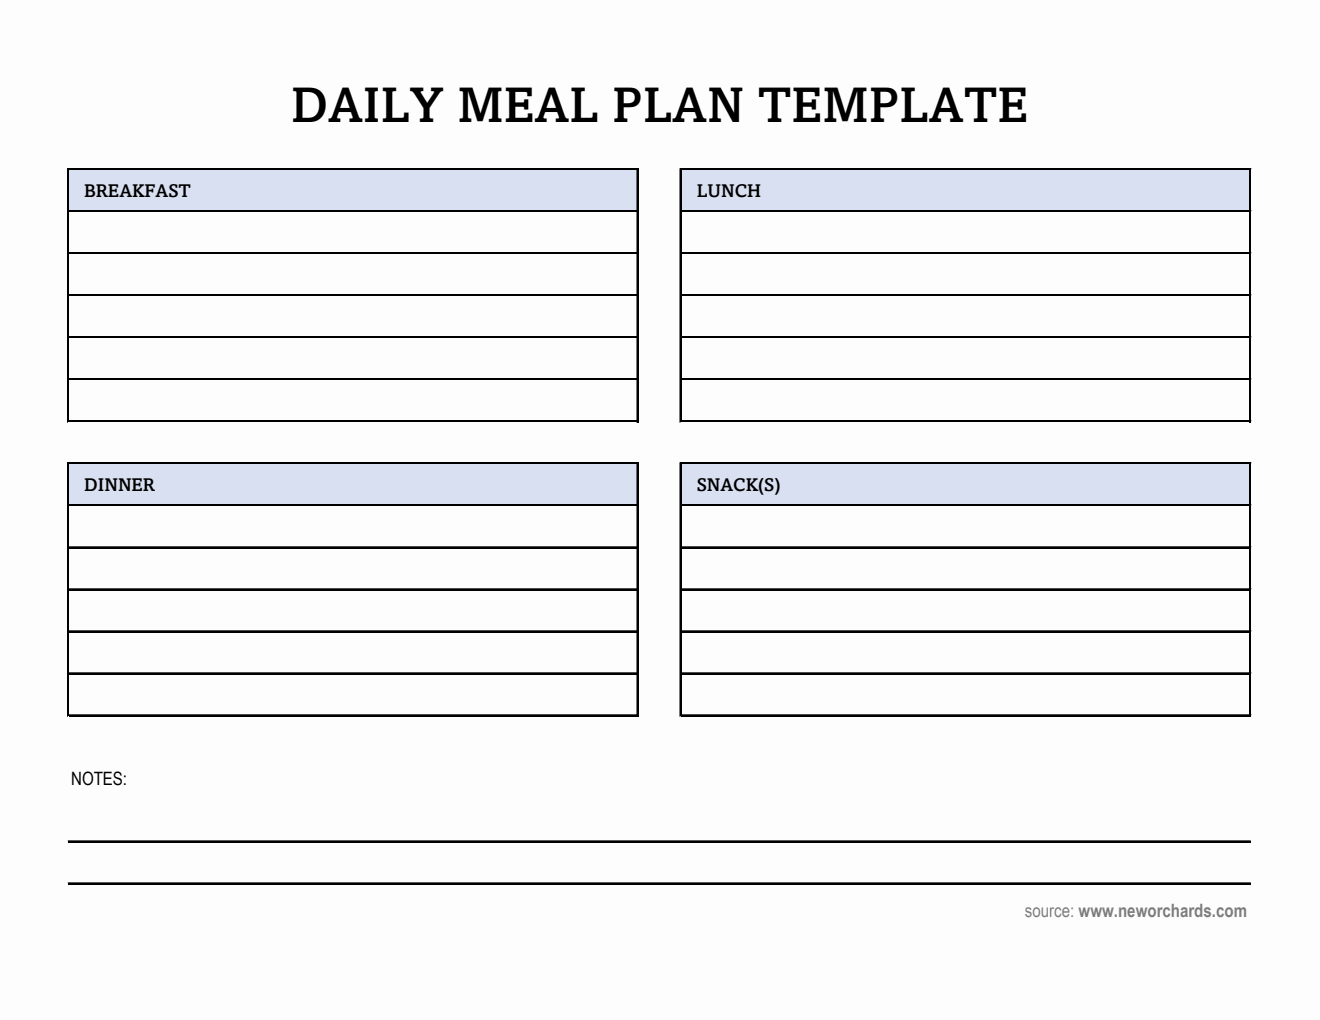 Editable Daily Meal Plan Template in Excel